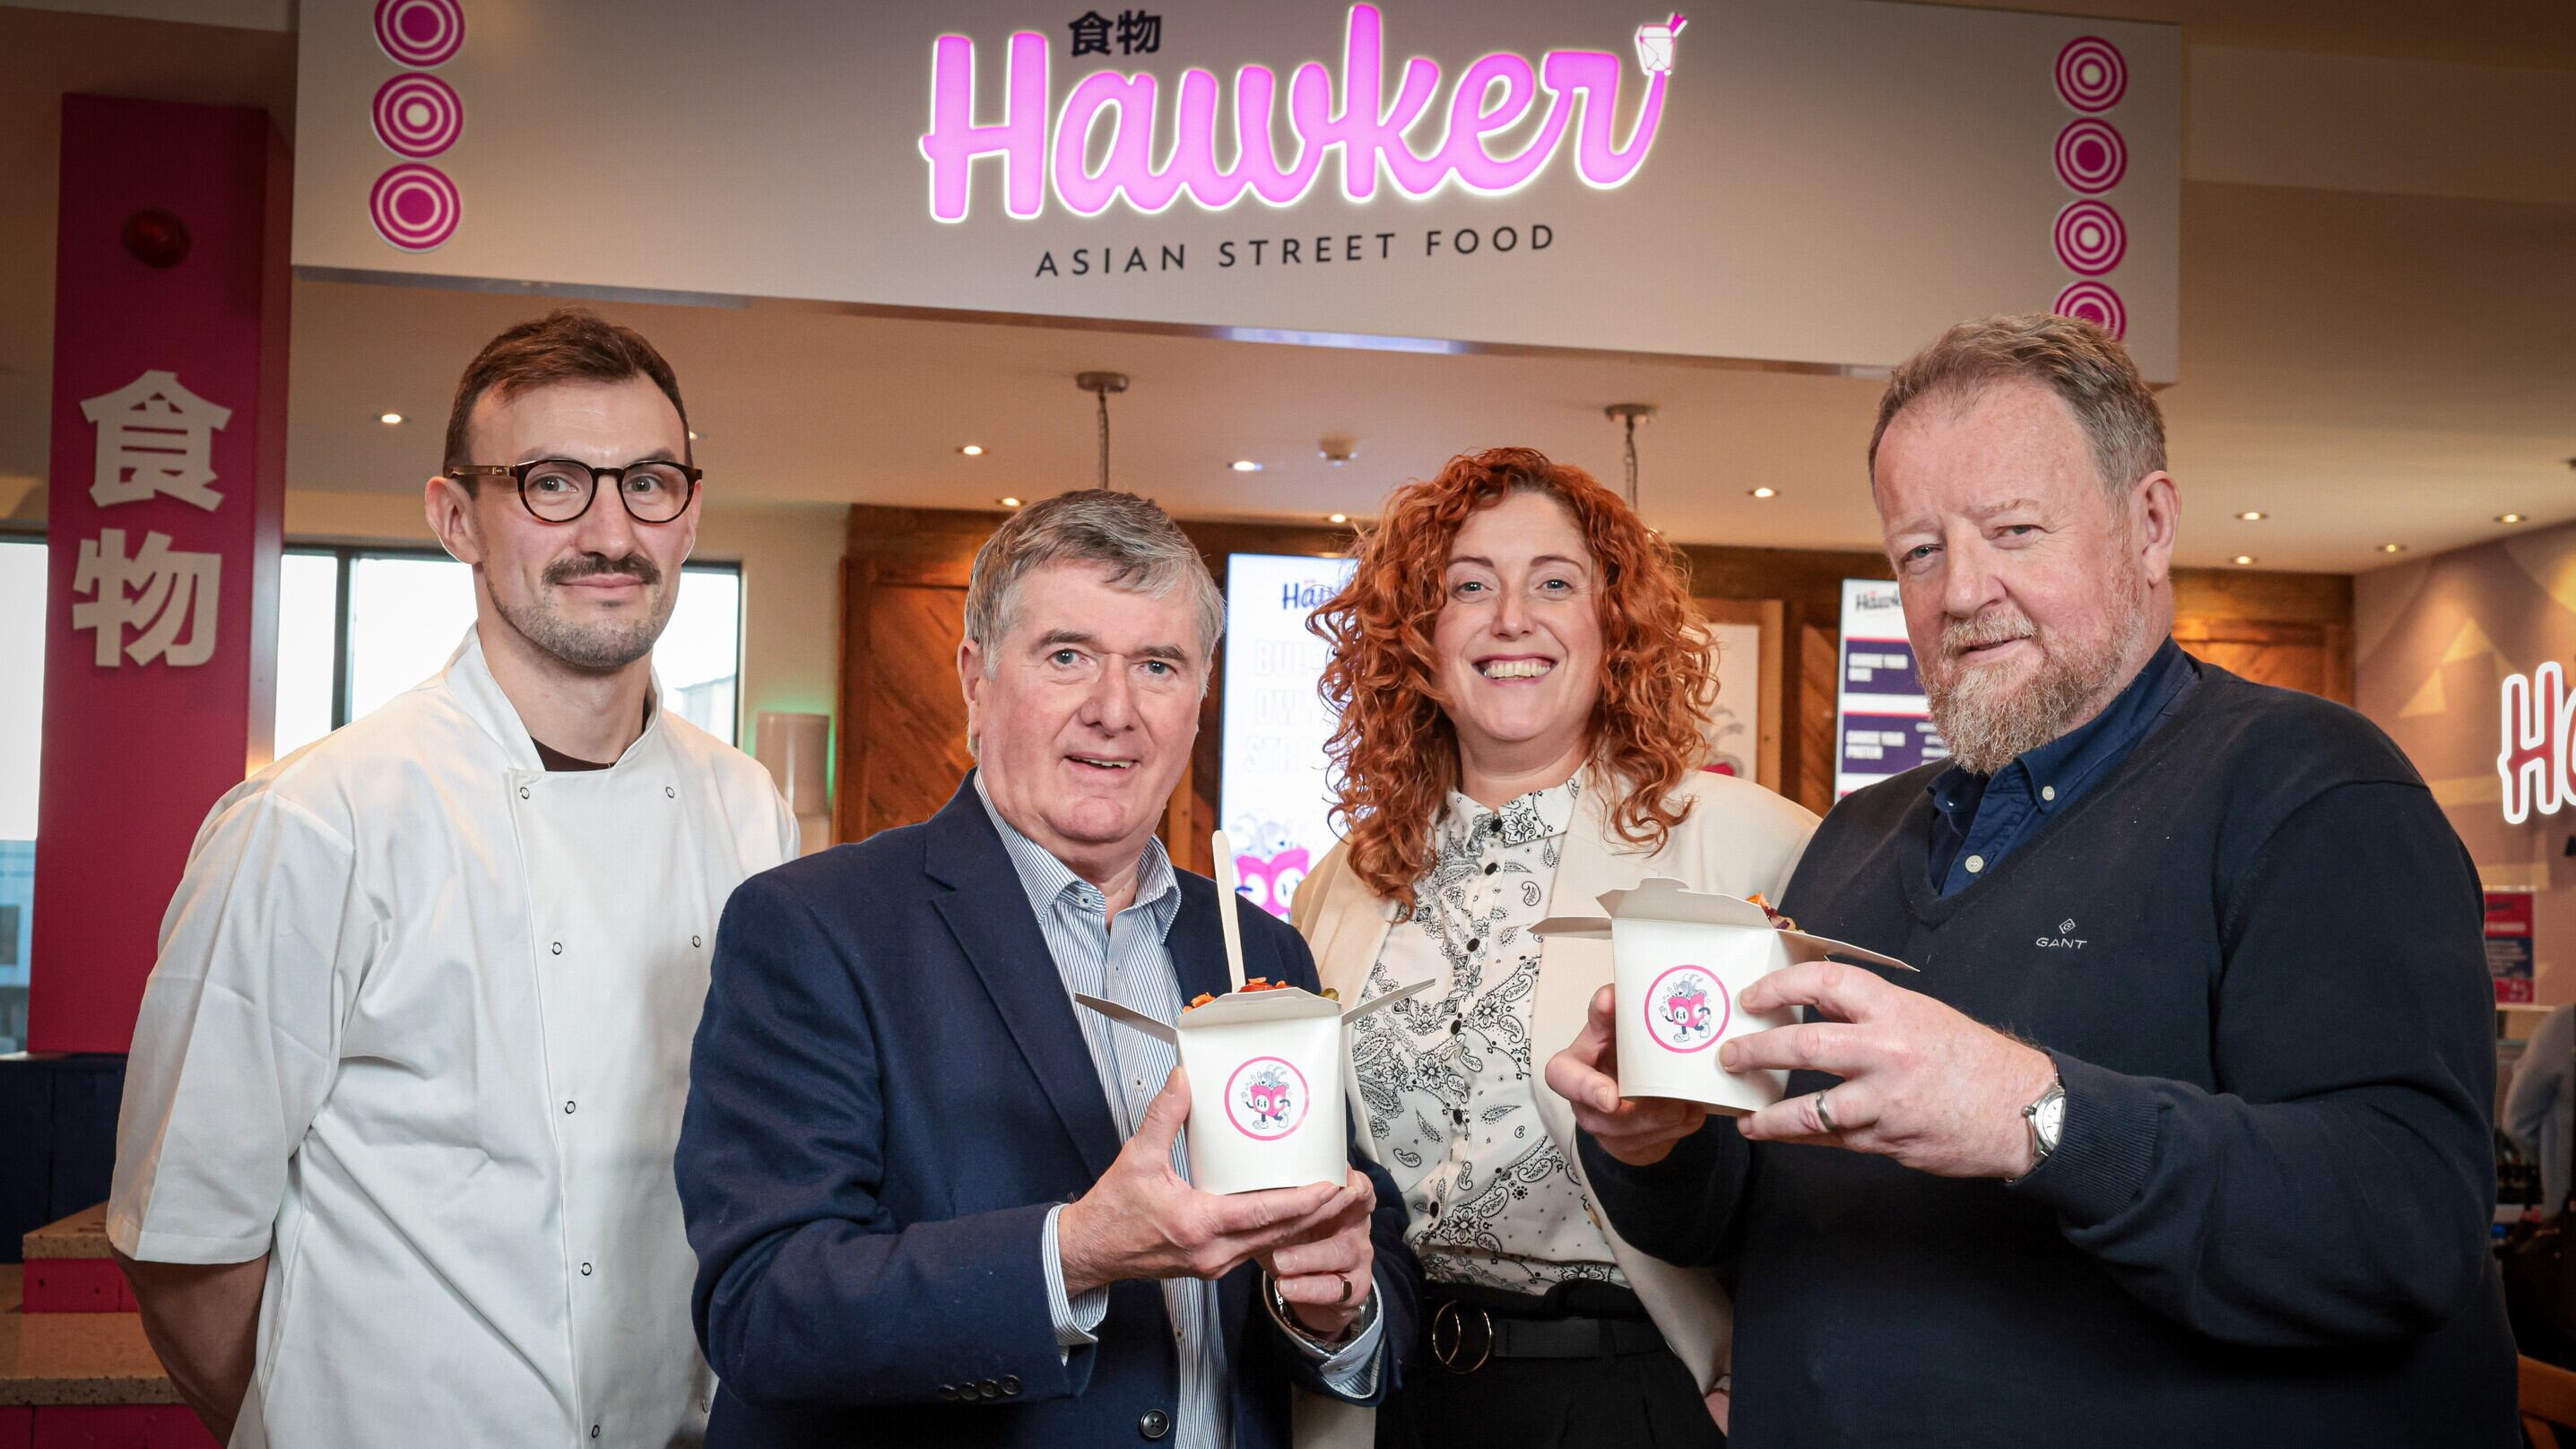 L-R: Matthew Wheatley, head chef, Hawker; Trevor Annon, Mount Charles; Stacey McAlister, operations director, Mount Charles; and Graham Keddie, managing director, Belfast International Airport.